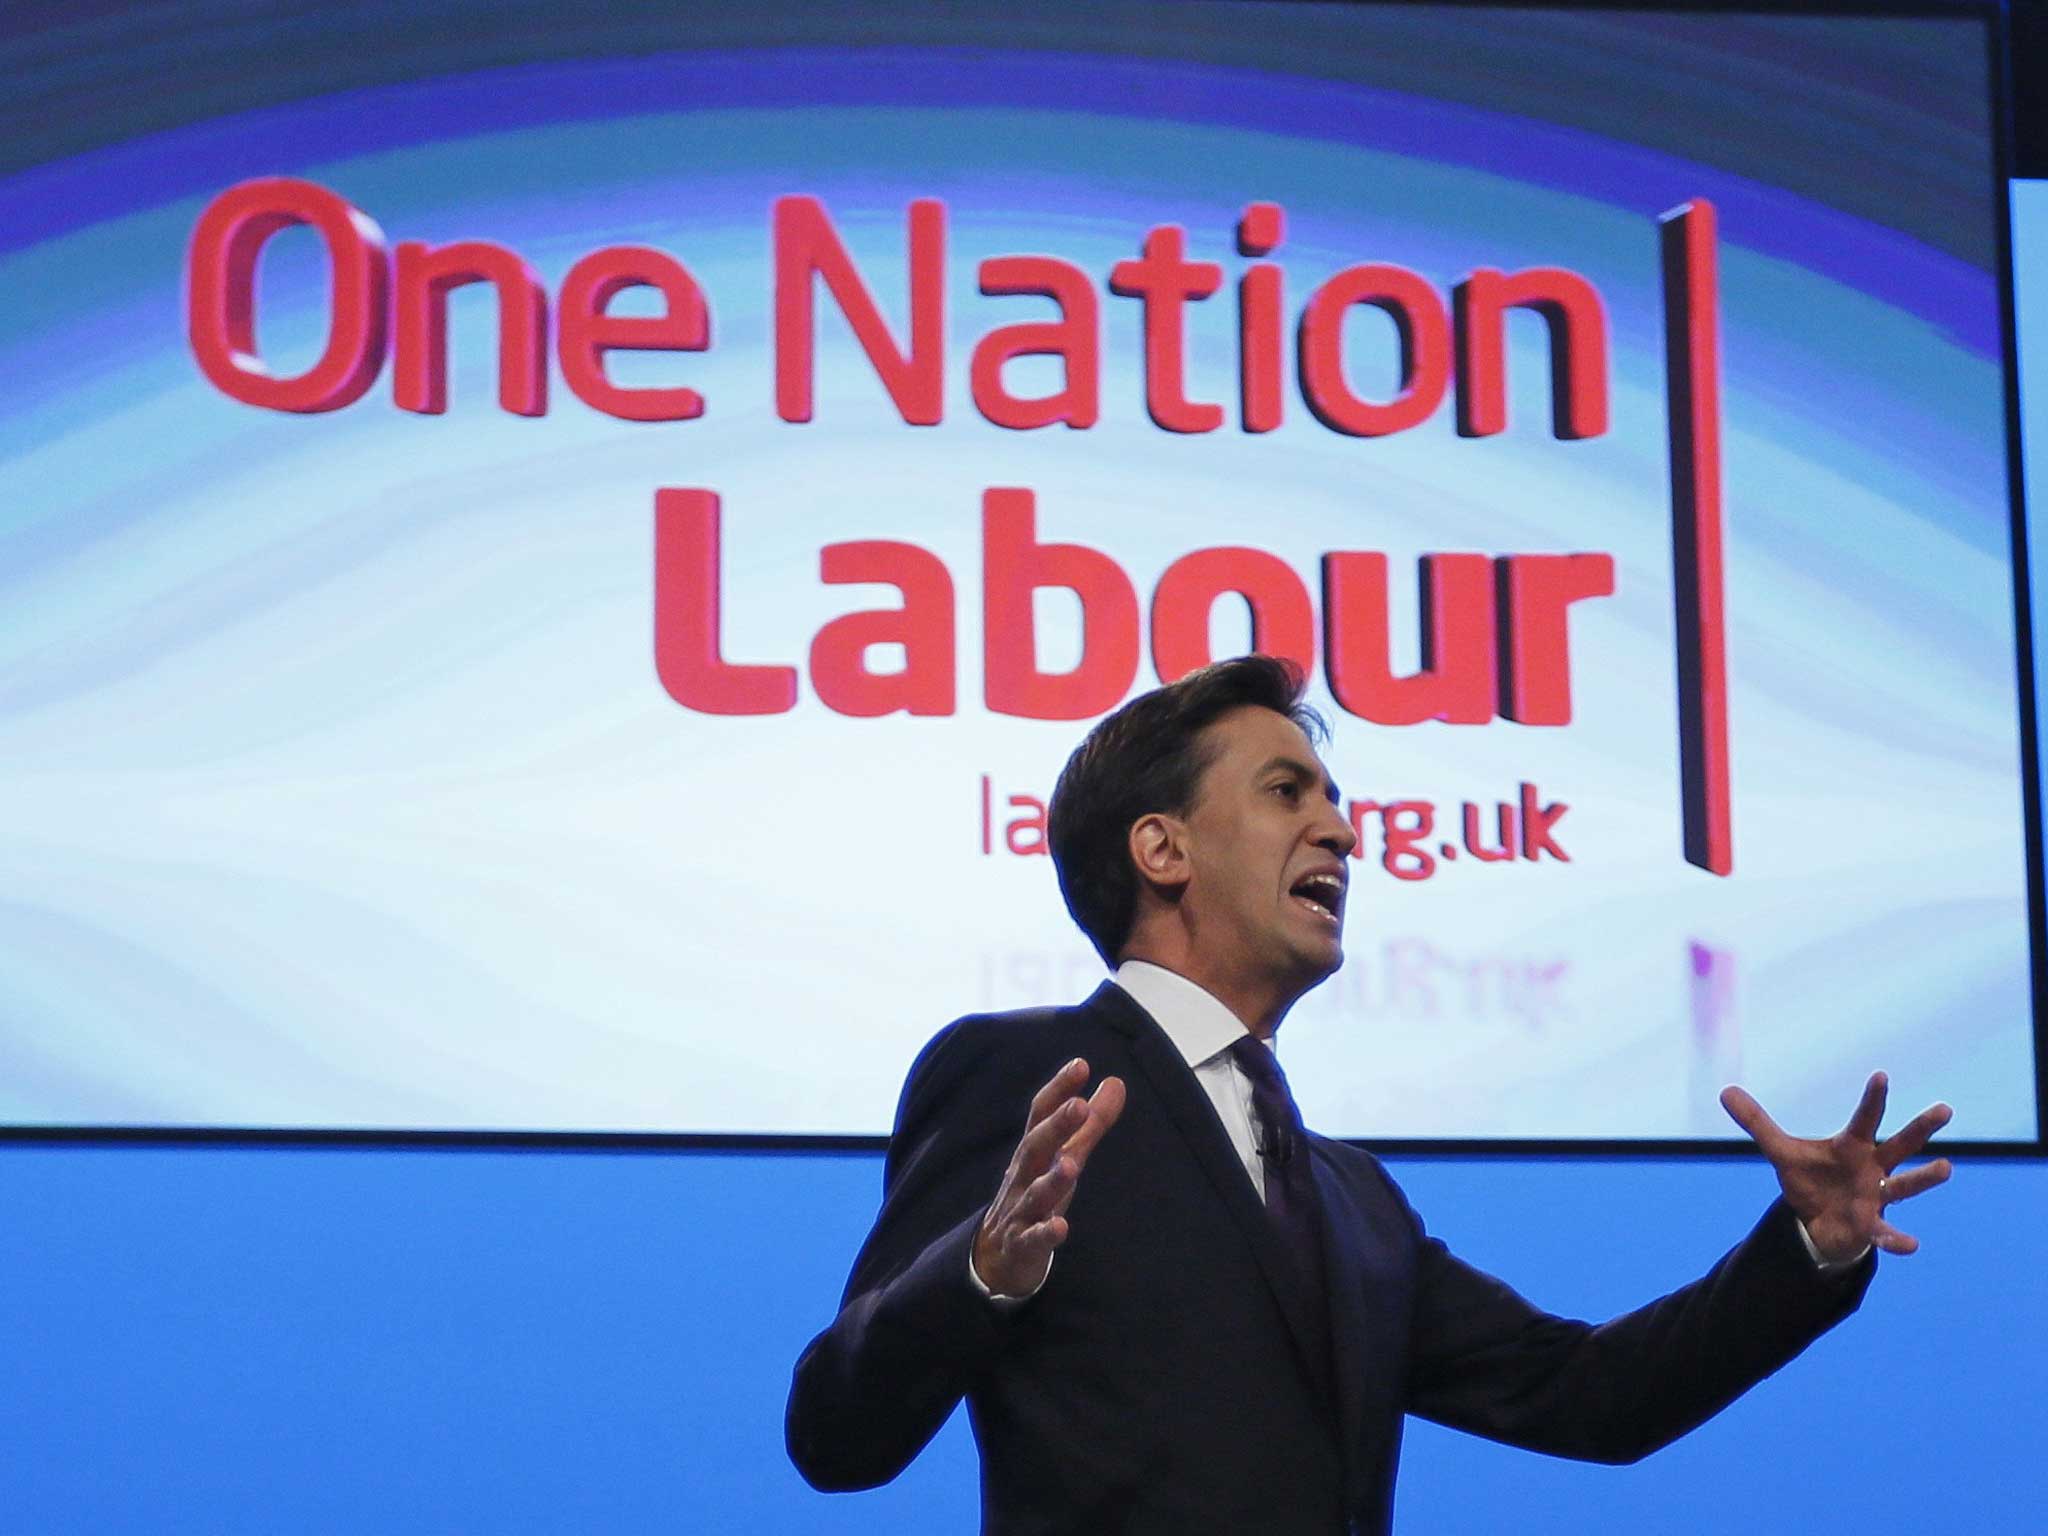 Ed Miliband delivers his speech